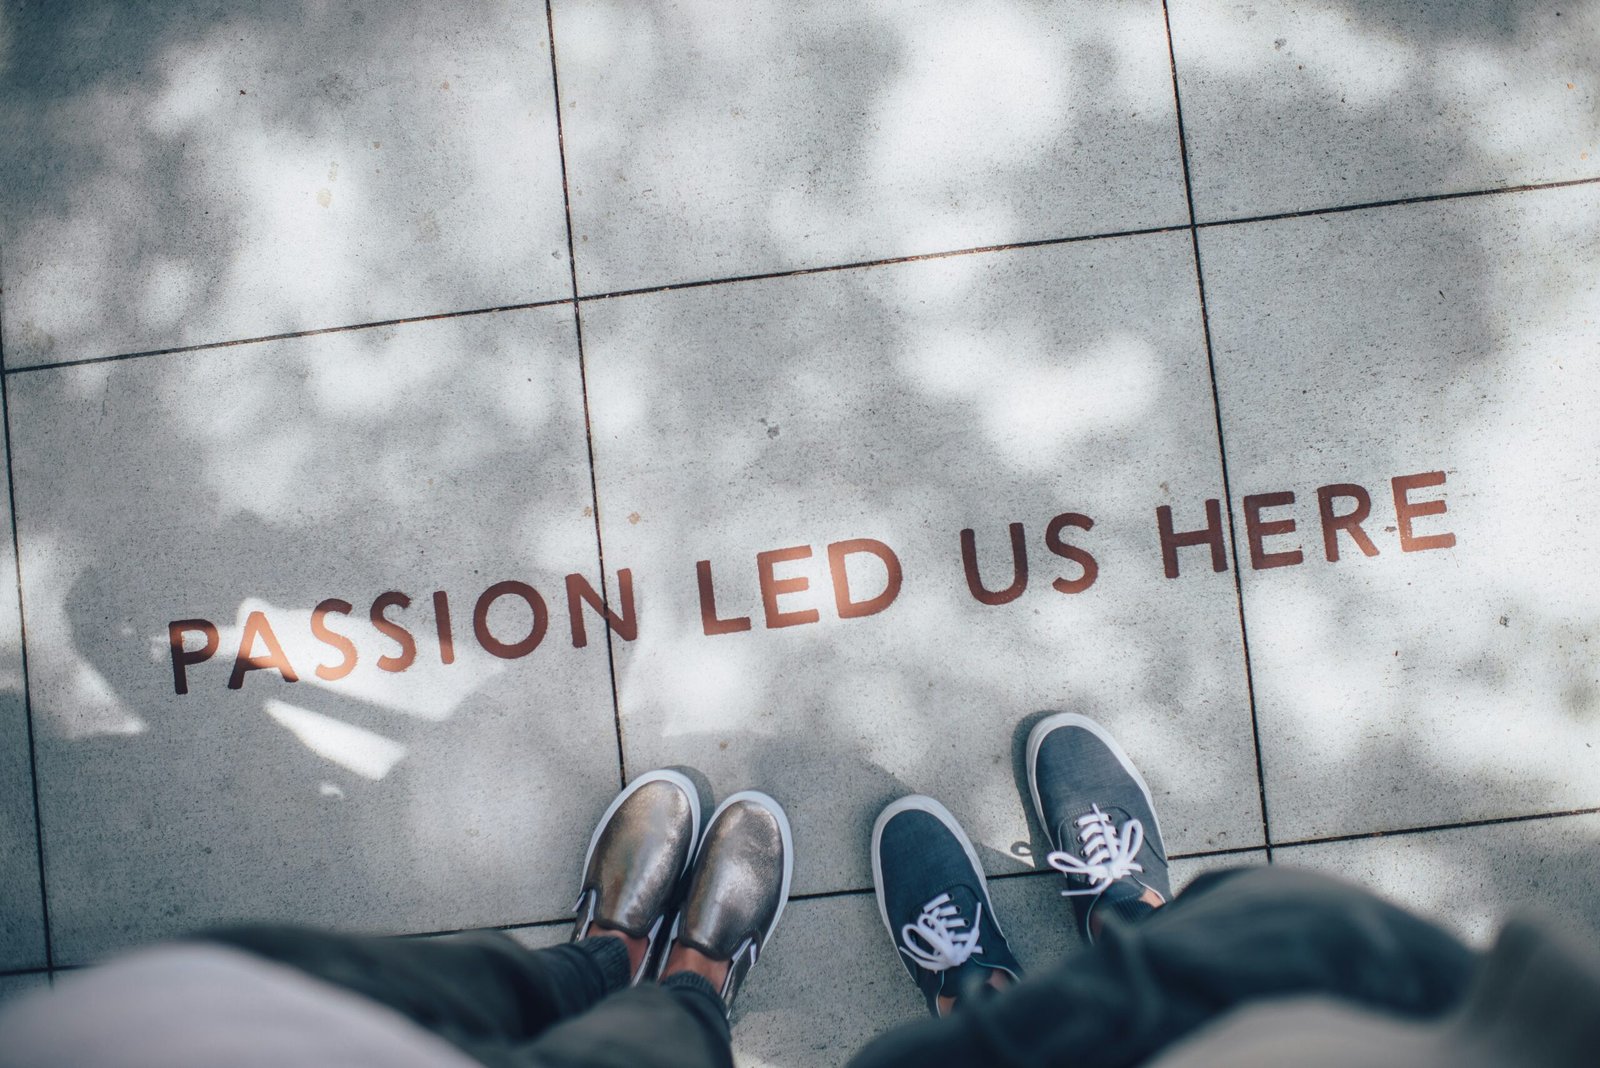 A photo of two people standing above text that reads "Passion led us here" to symbolize the beginning of my journey with this blog.